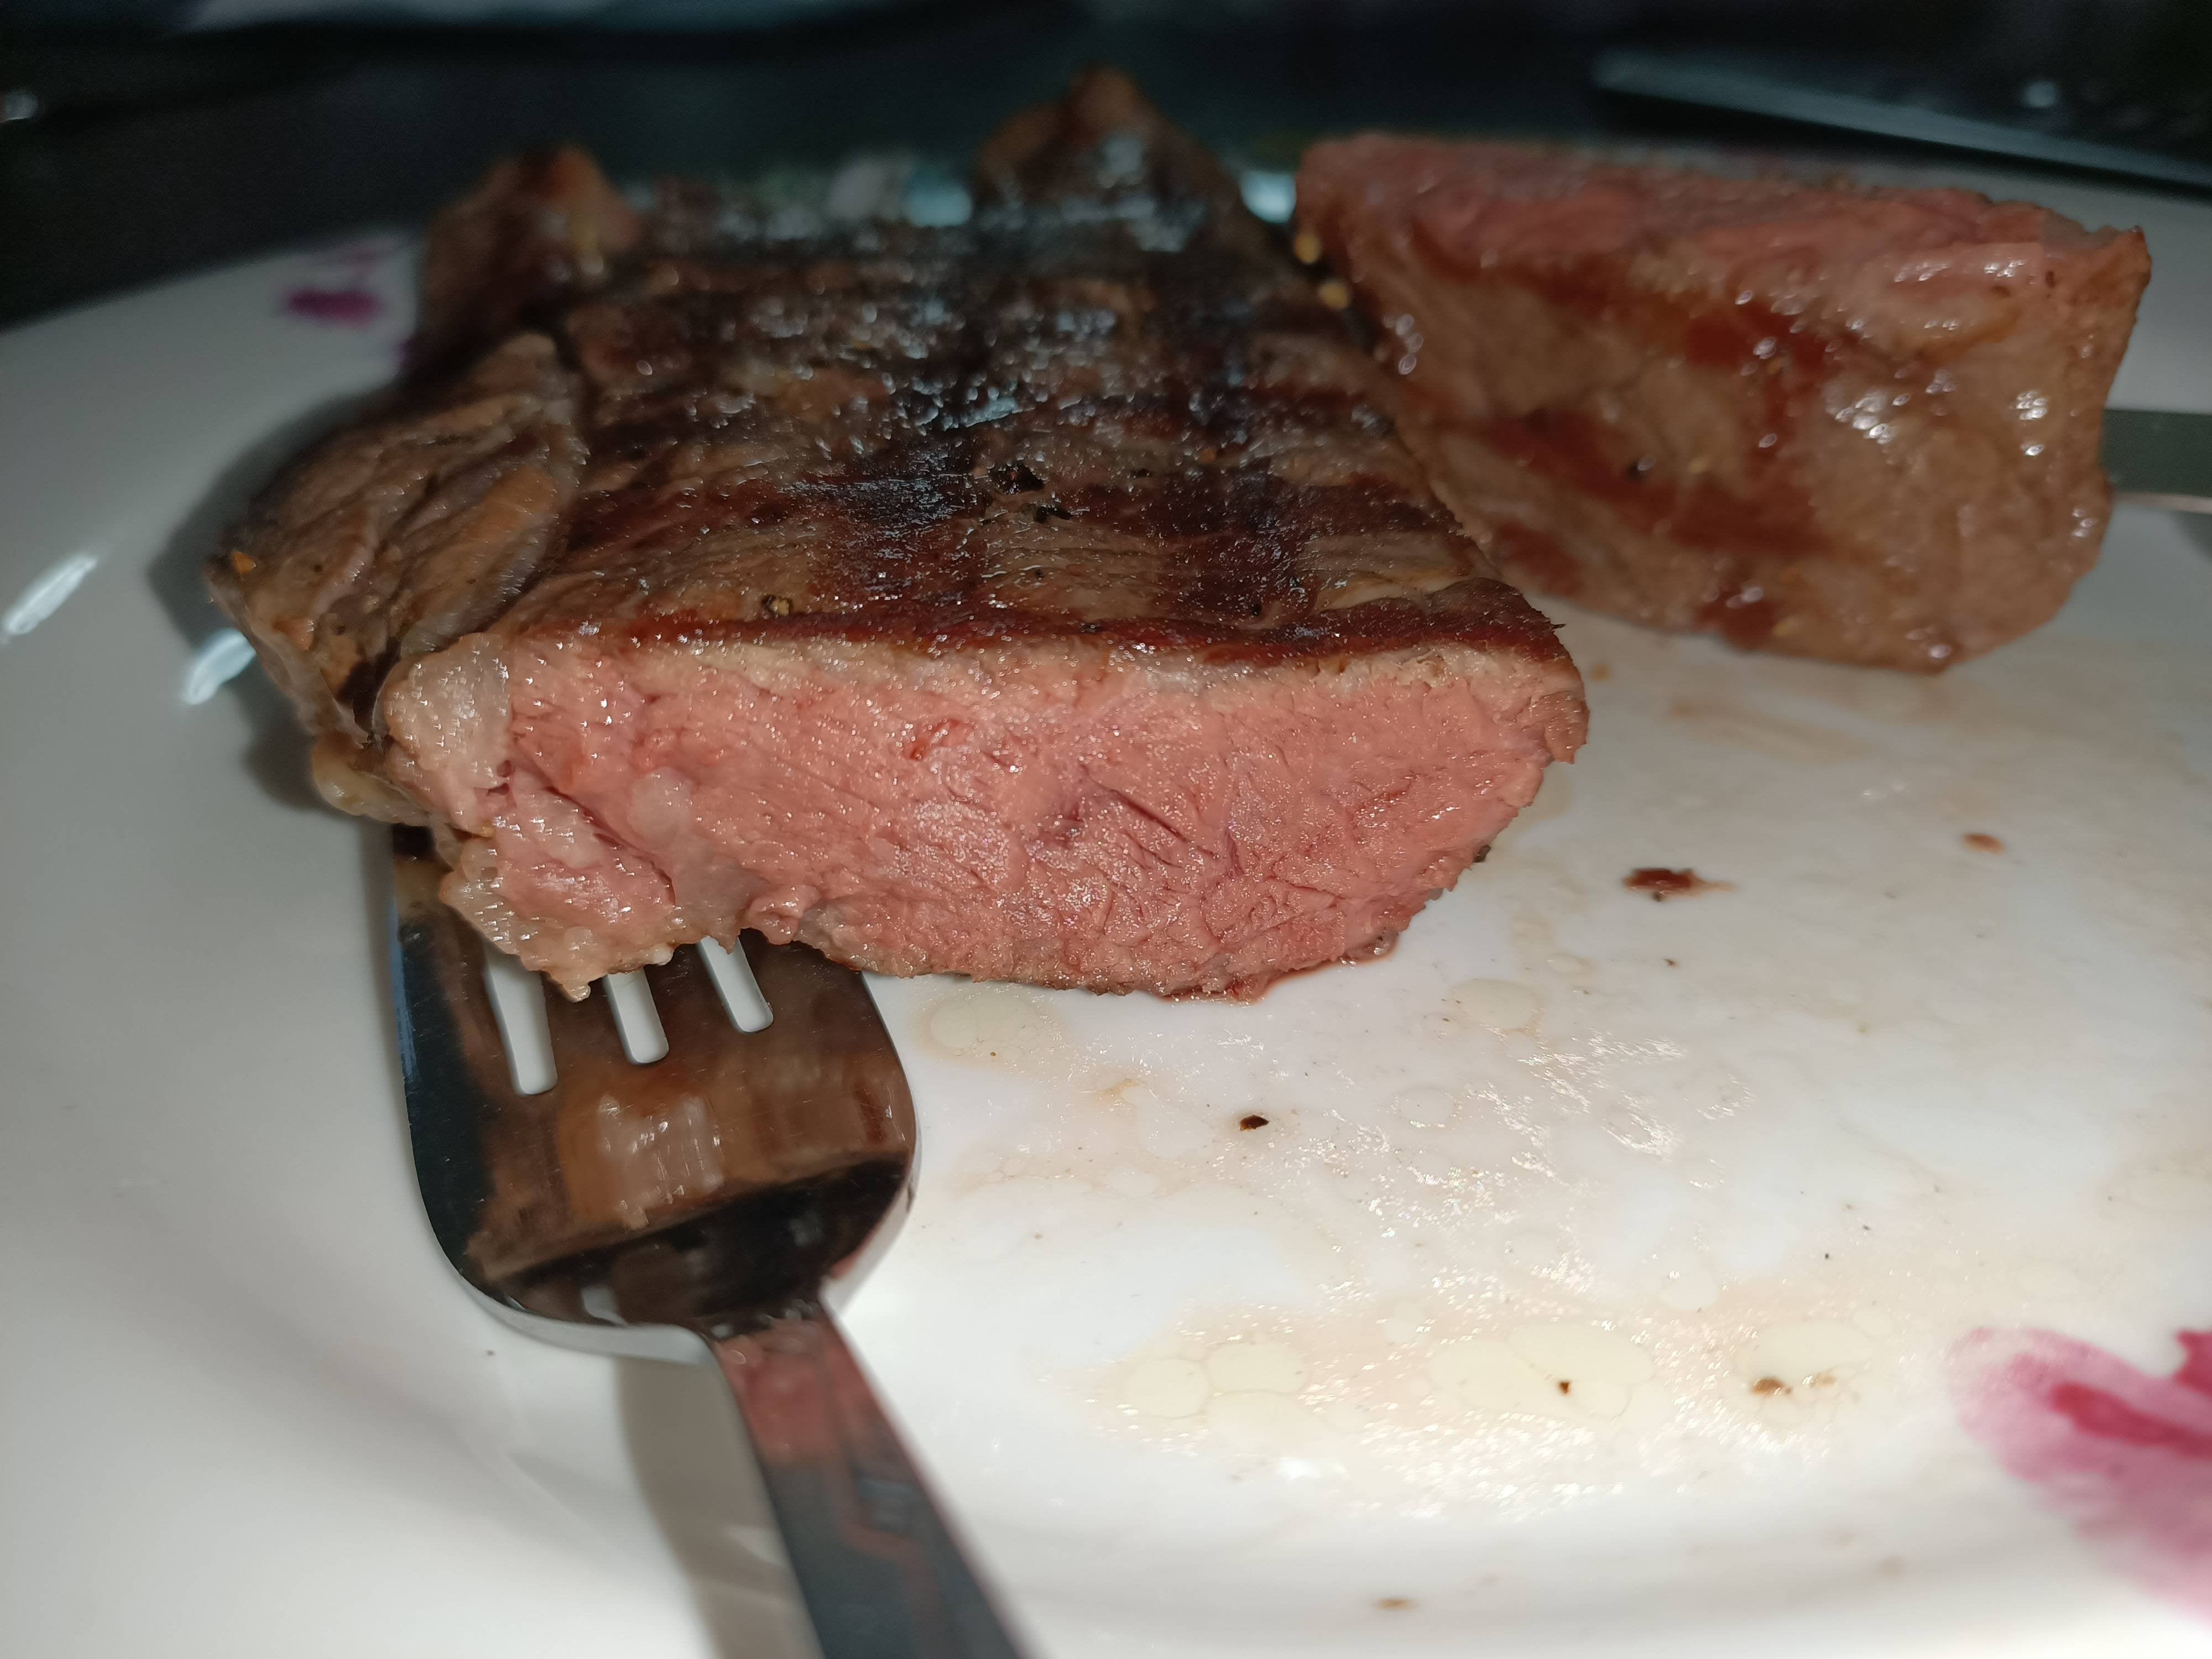 Second attempt was a chuck steak cooked at 54°C for about 4 hours and then seared on a weber ...